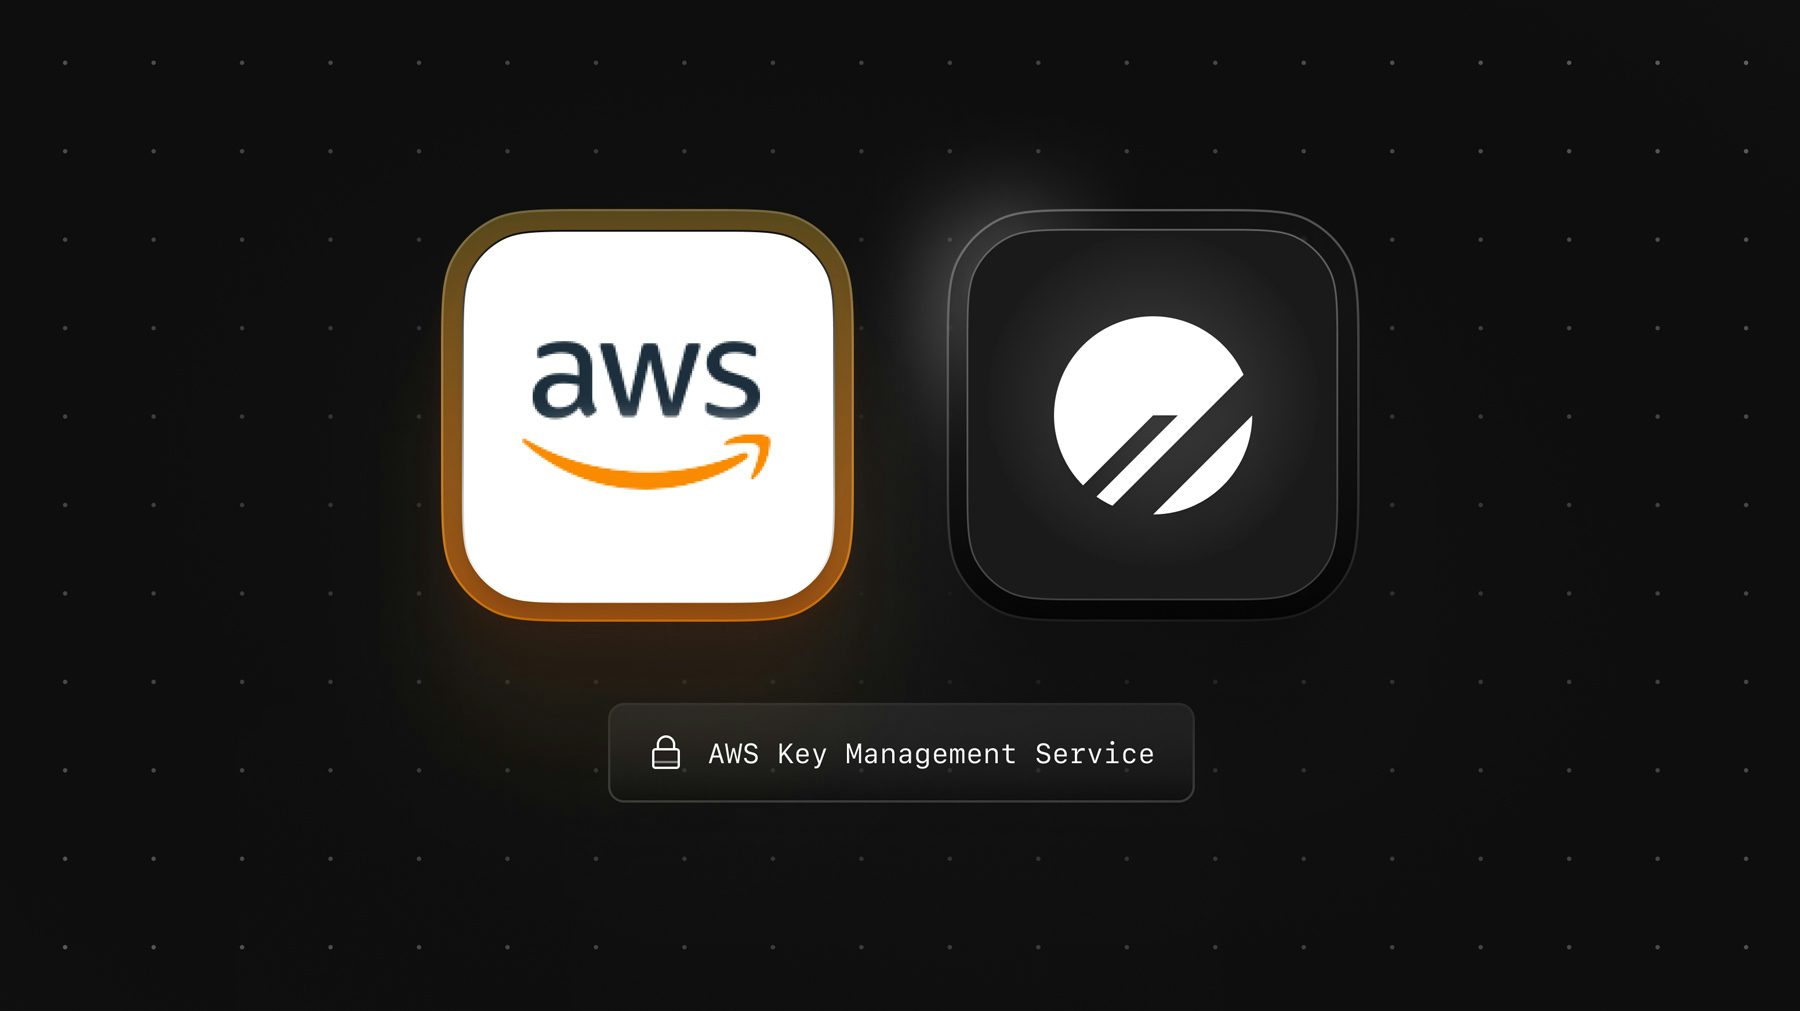 Secure your connection string with AWS KMS